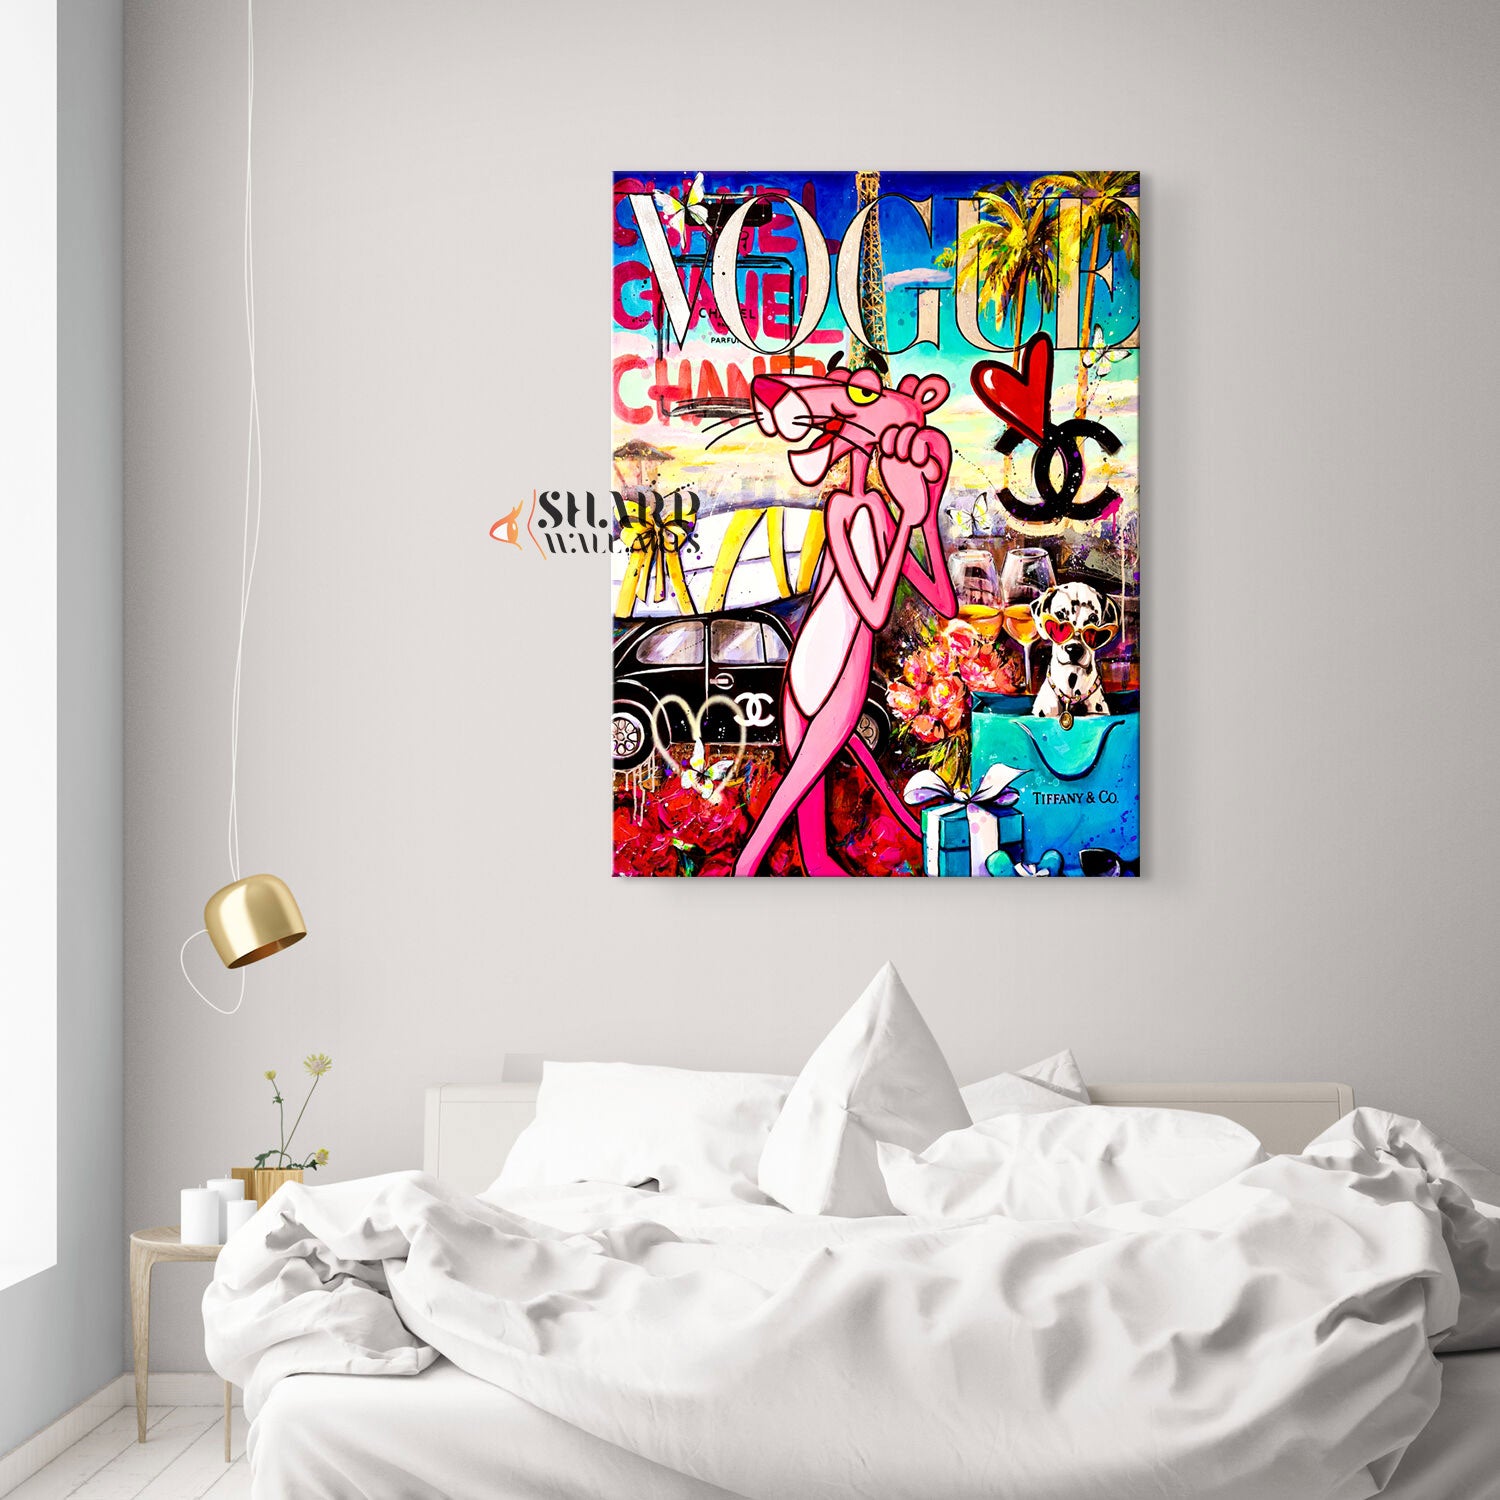 The Panther Loves Vogue Canvas Wall Art